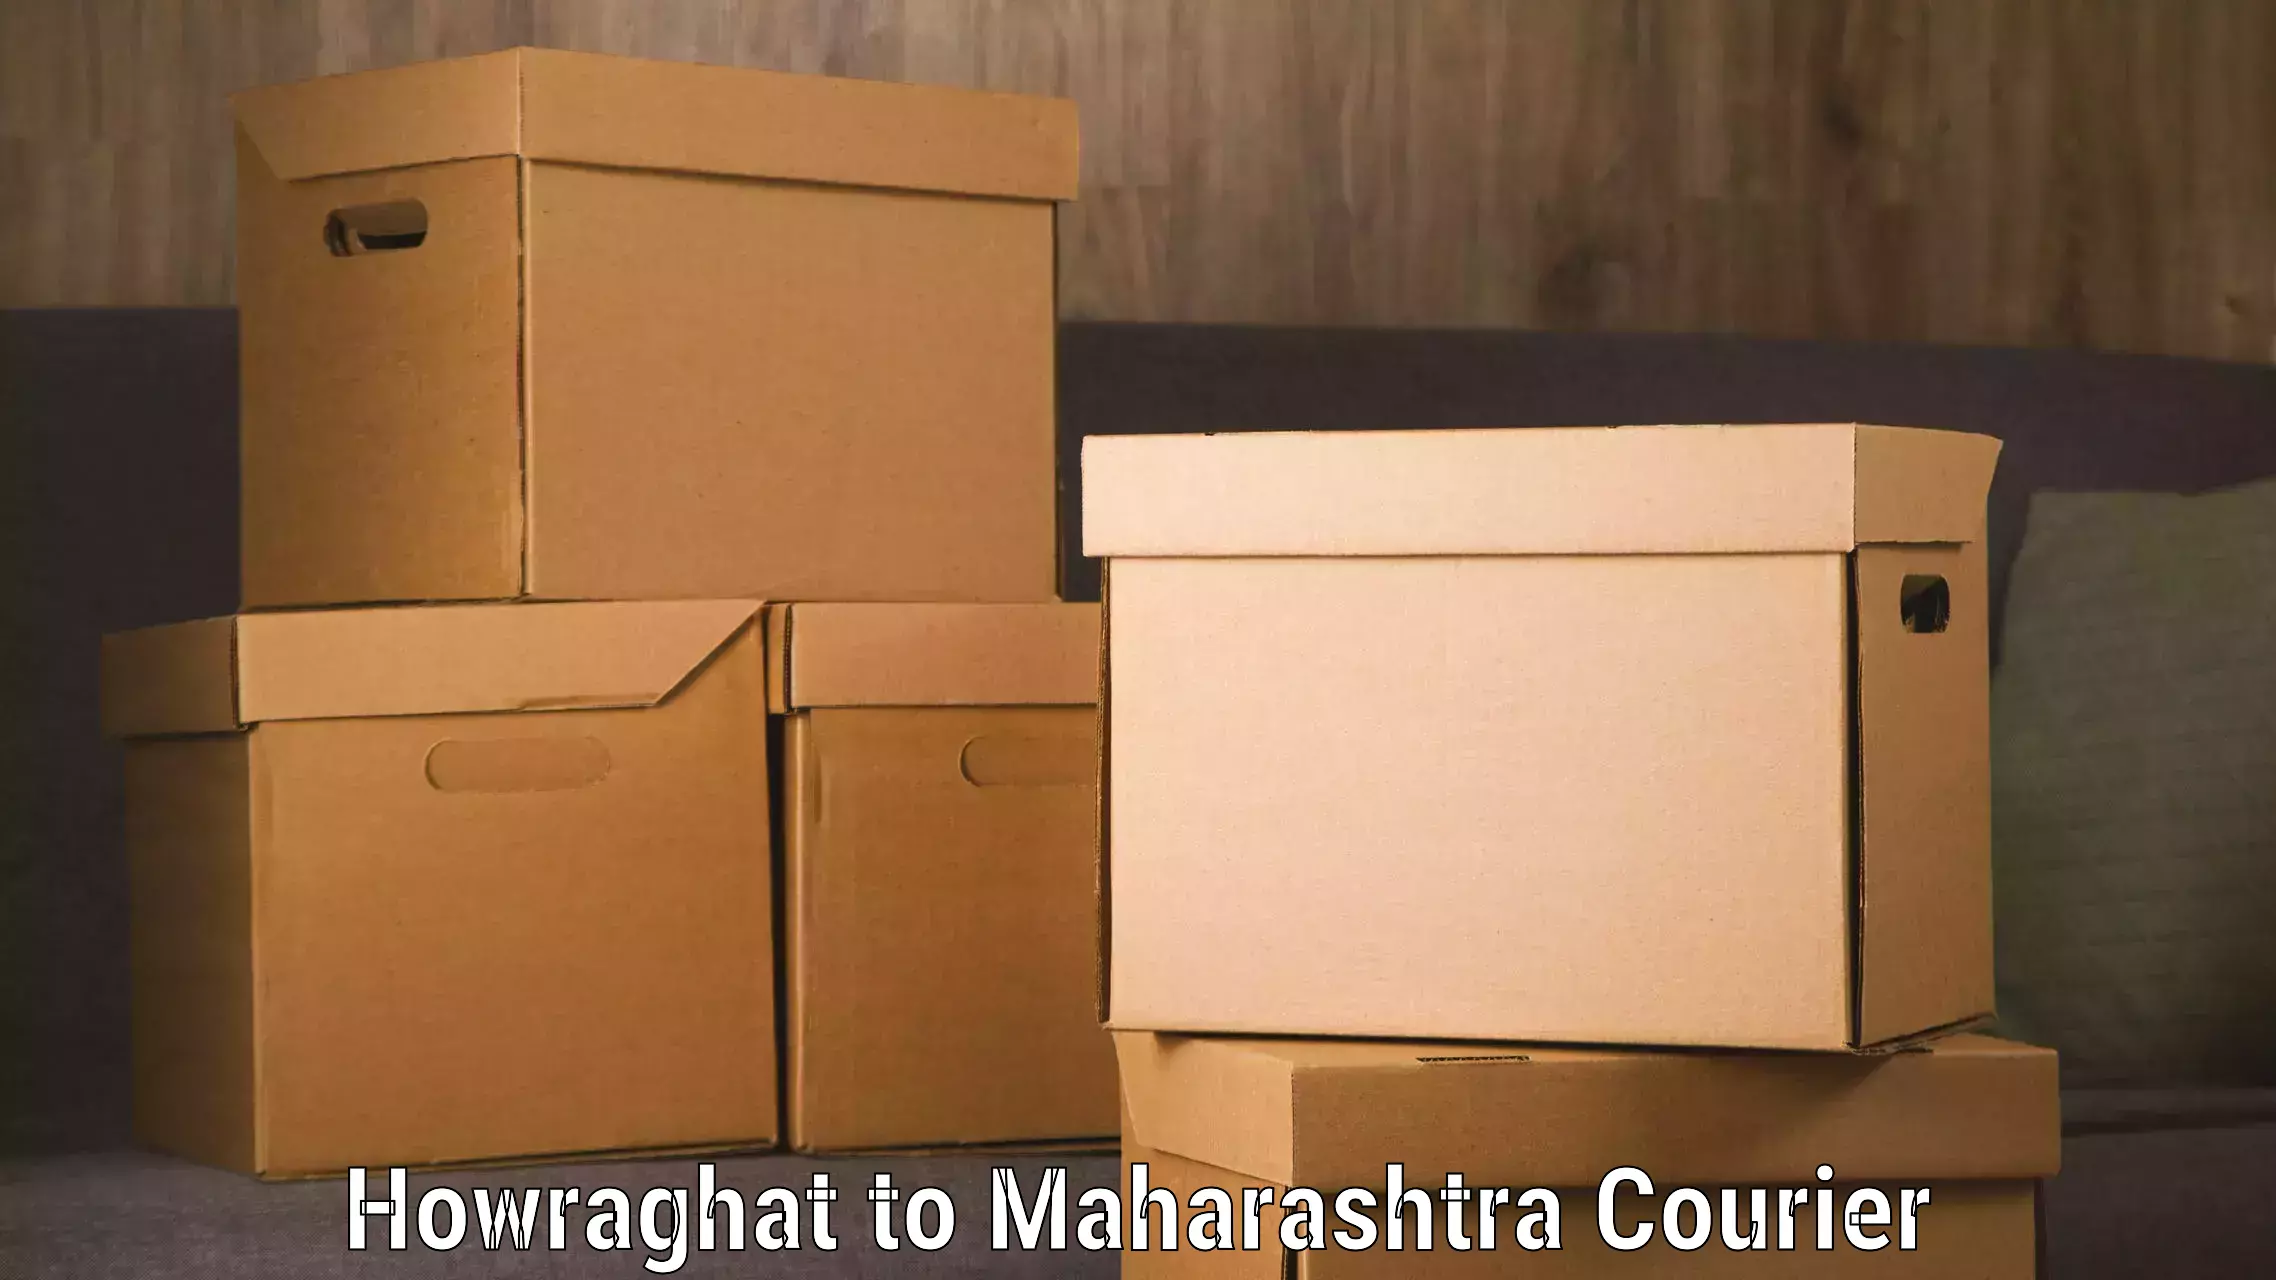 Luggage delivery providers Howraghat to Gadchiroli